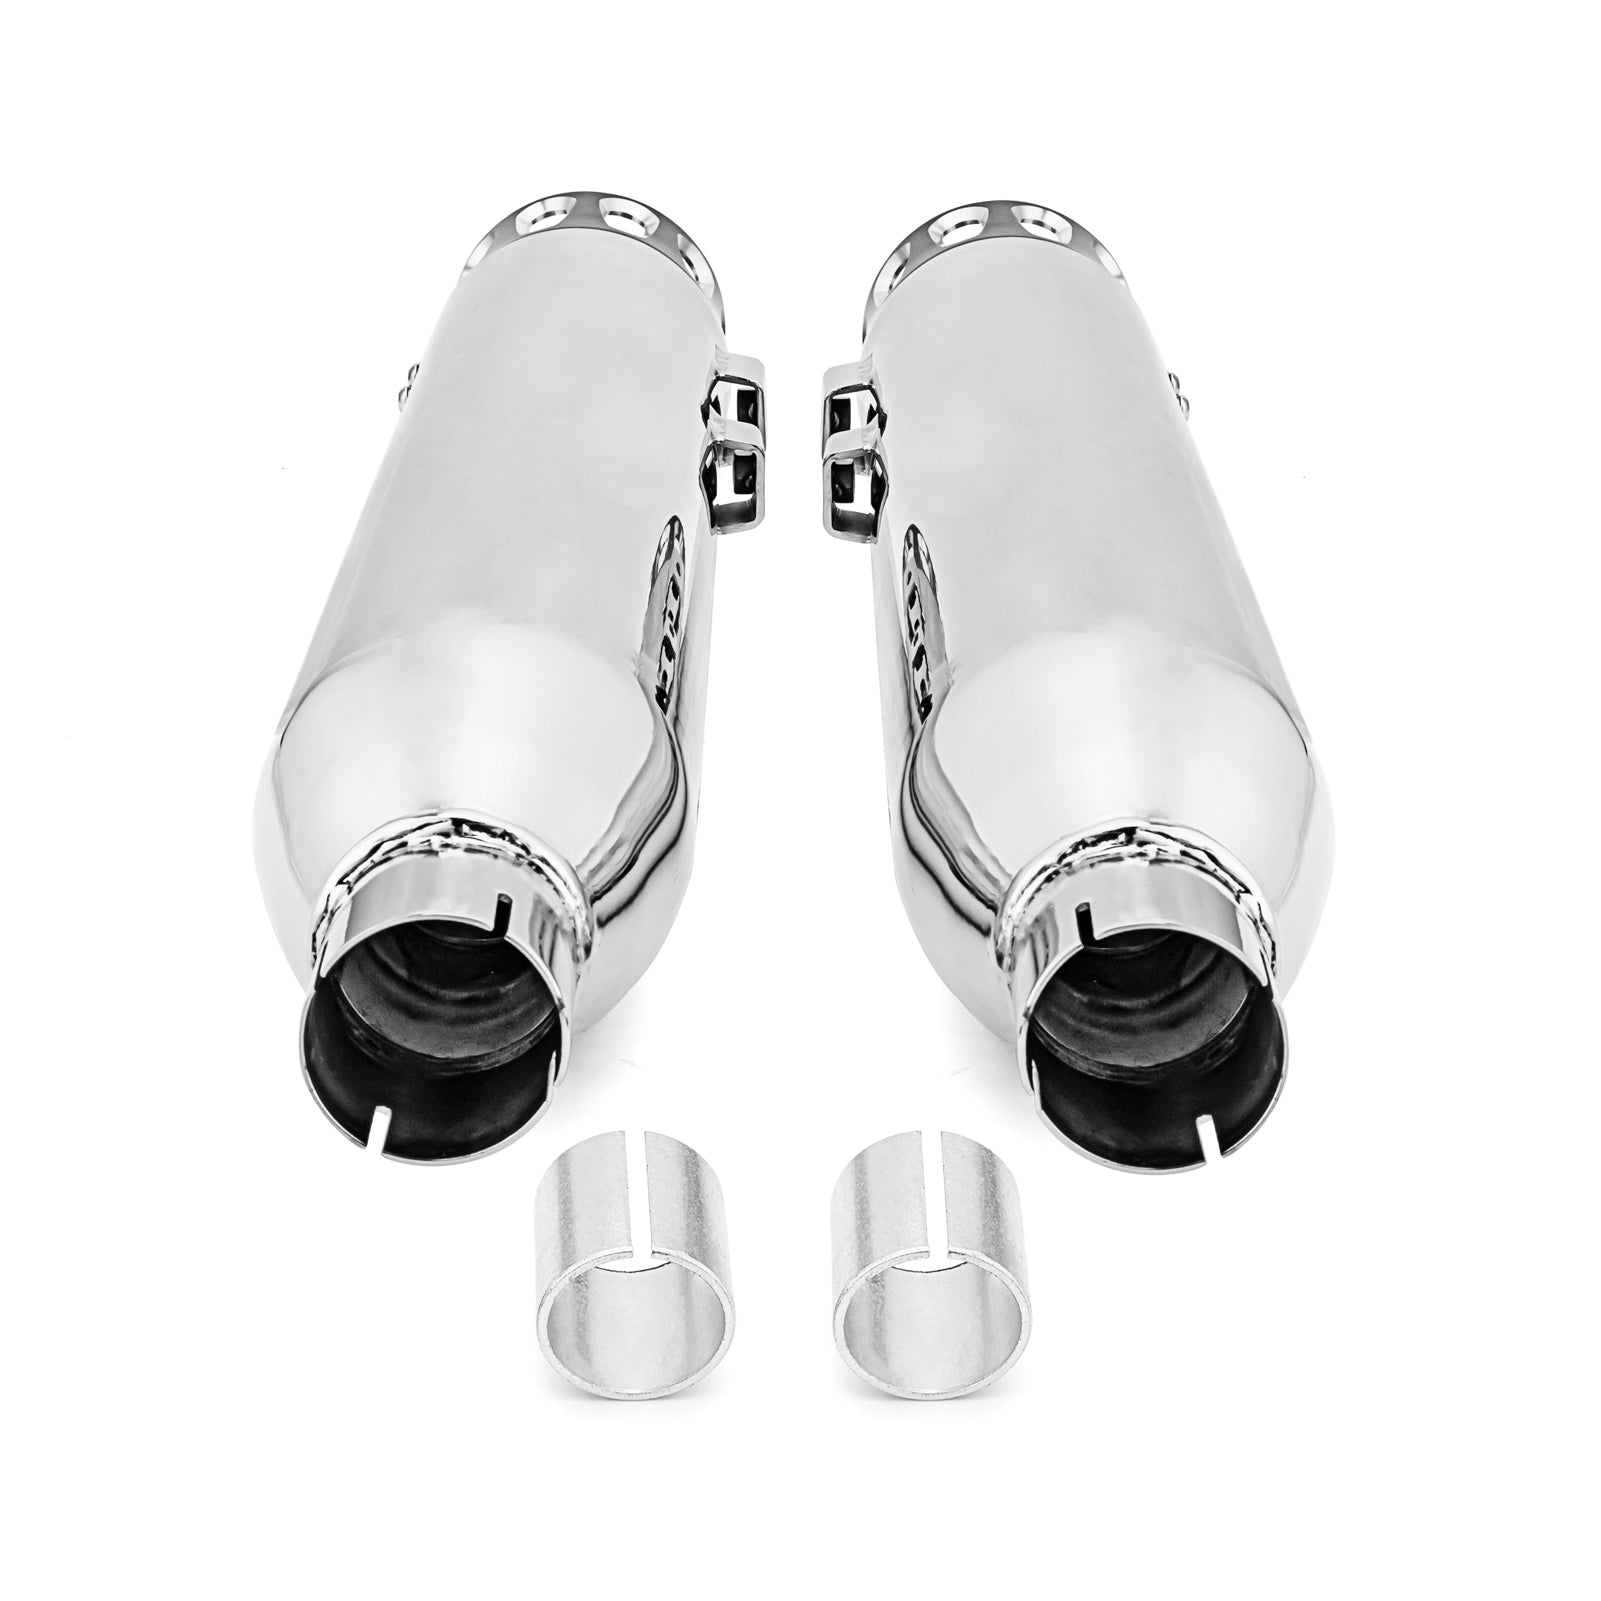 Chrome 4"Slip-On Mufflers Exhaust, Exhaust Pipes For 1995-2016 Harley Davidson Touring